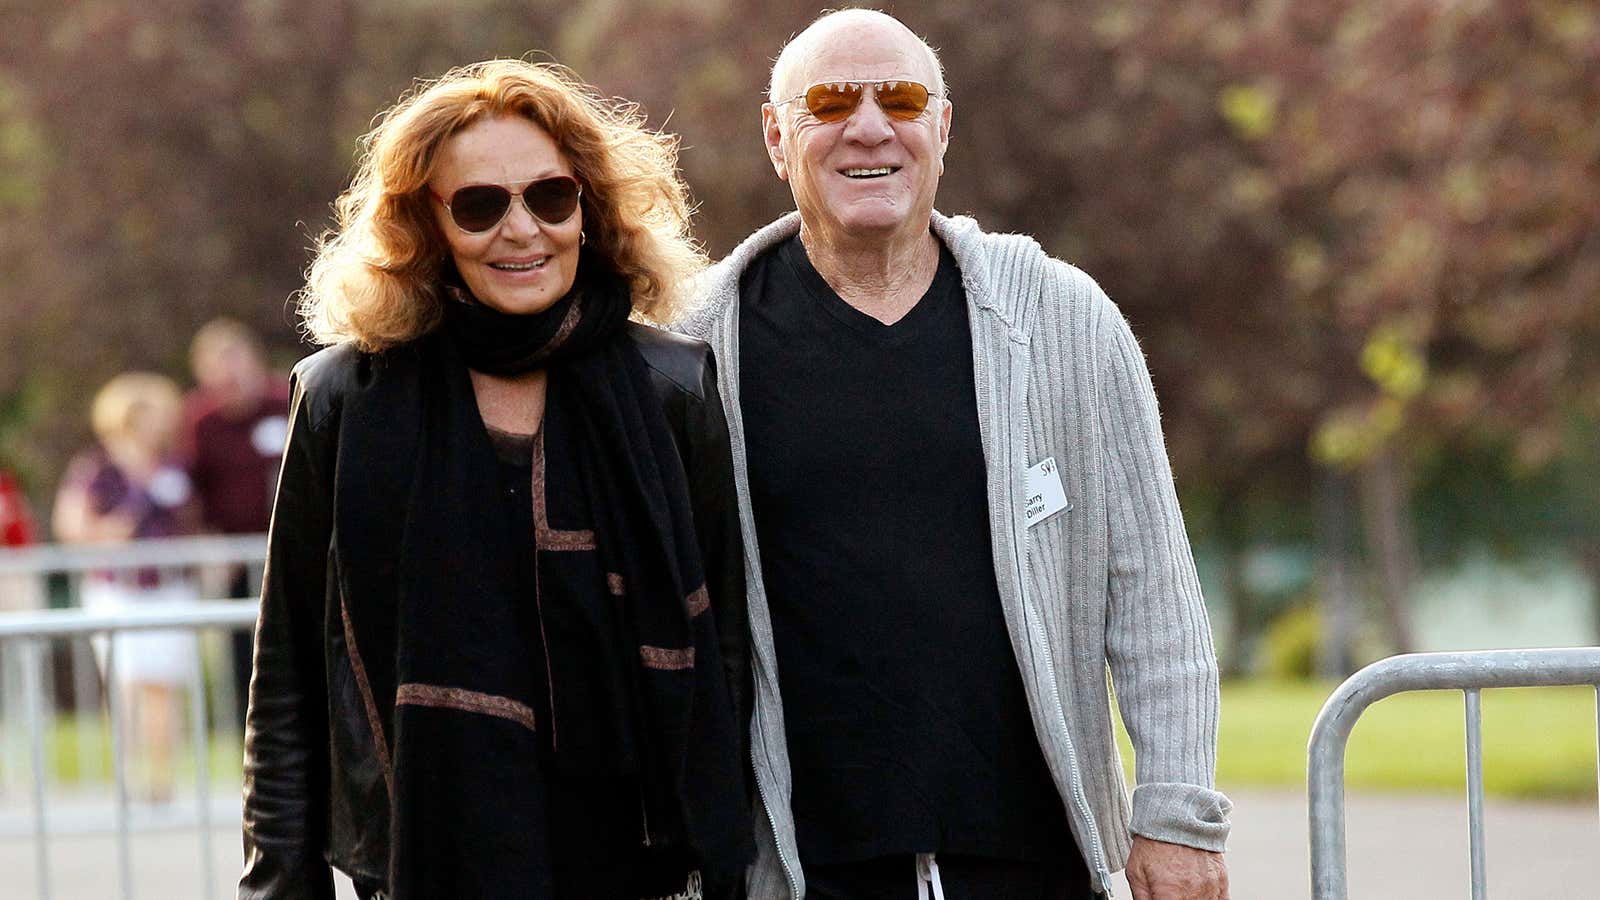 Power couple Diane Von Furstenberg and Barry Diller look fab at this year’s conference